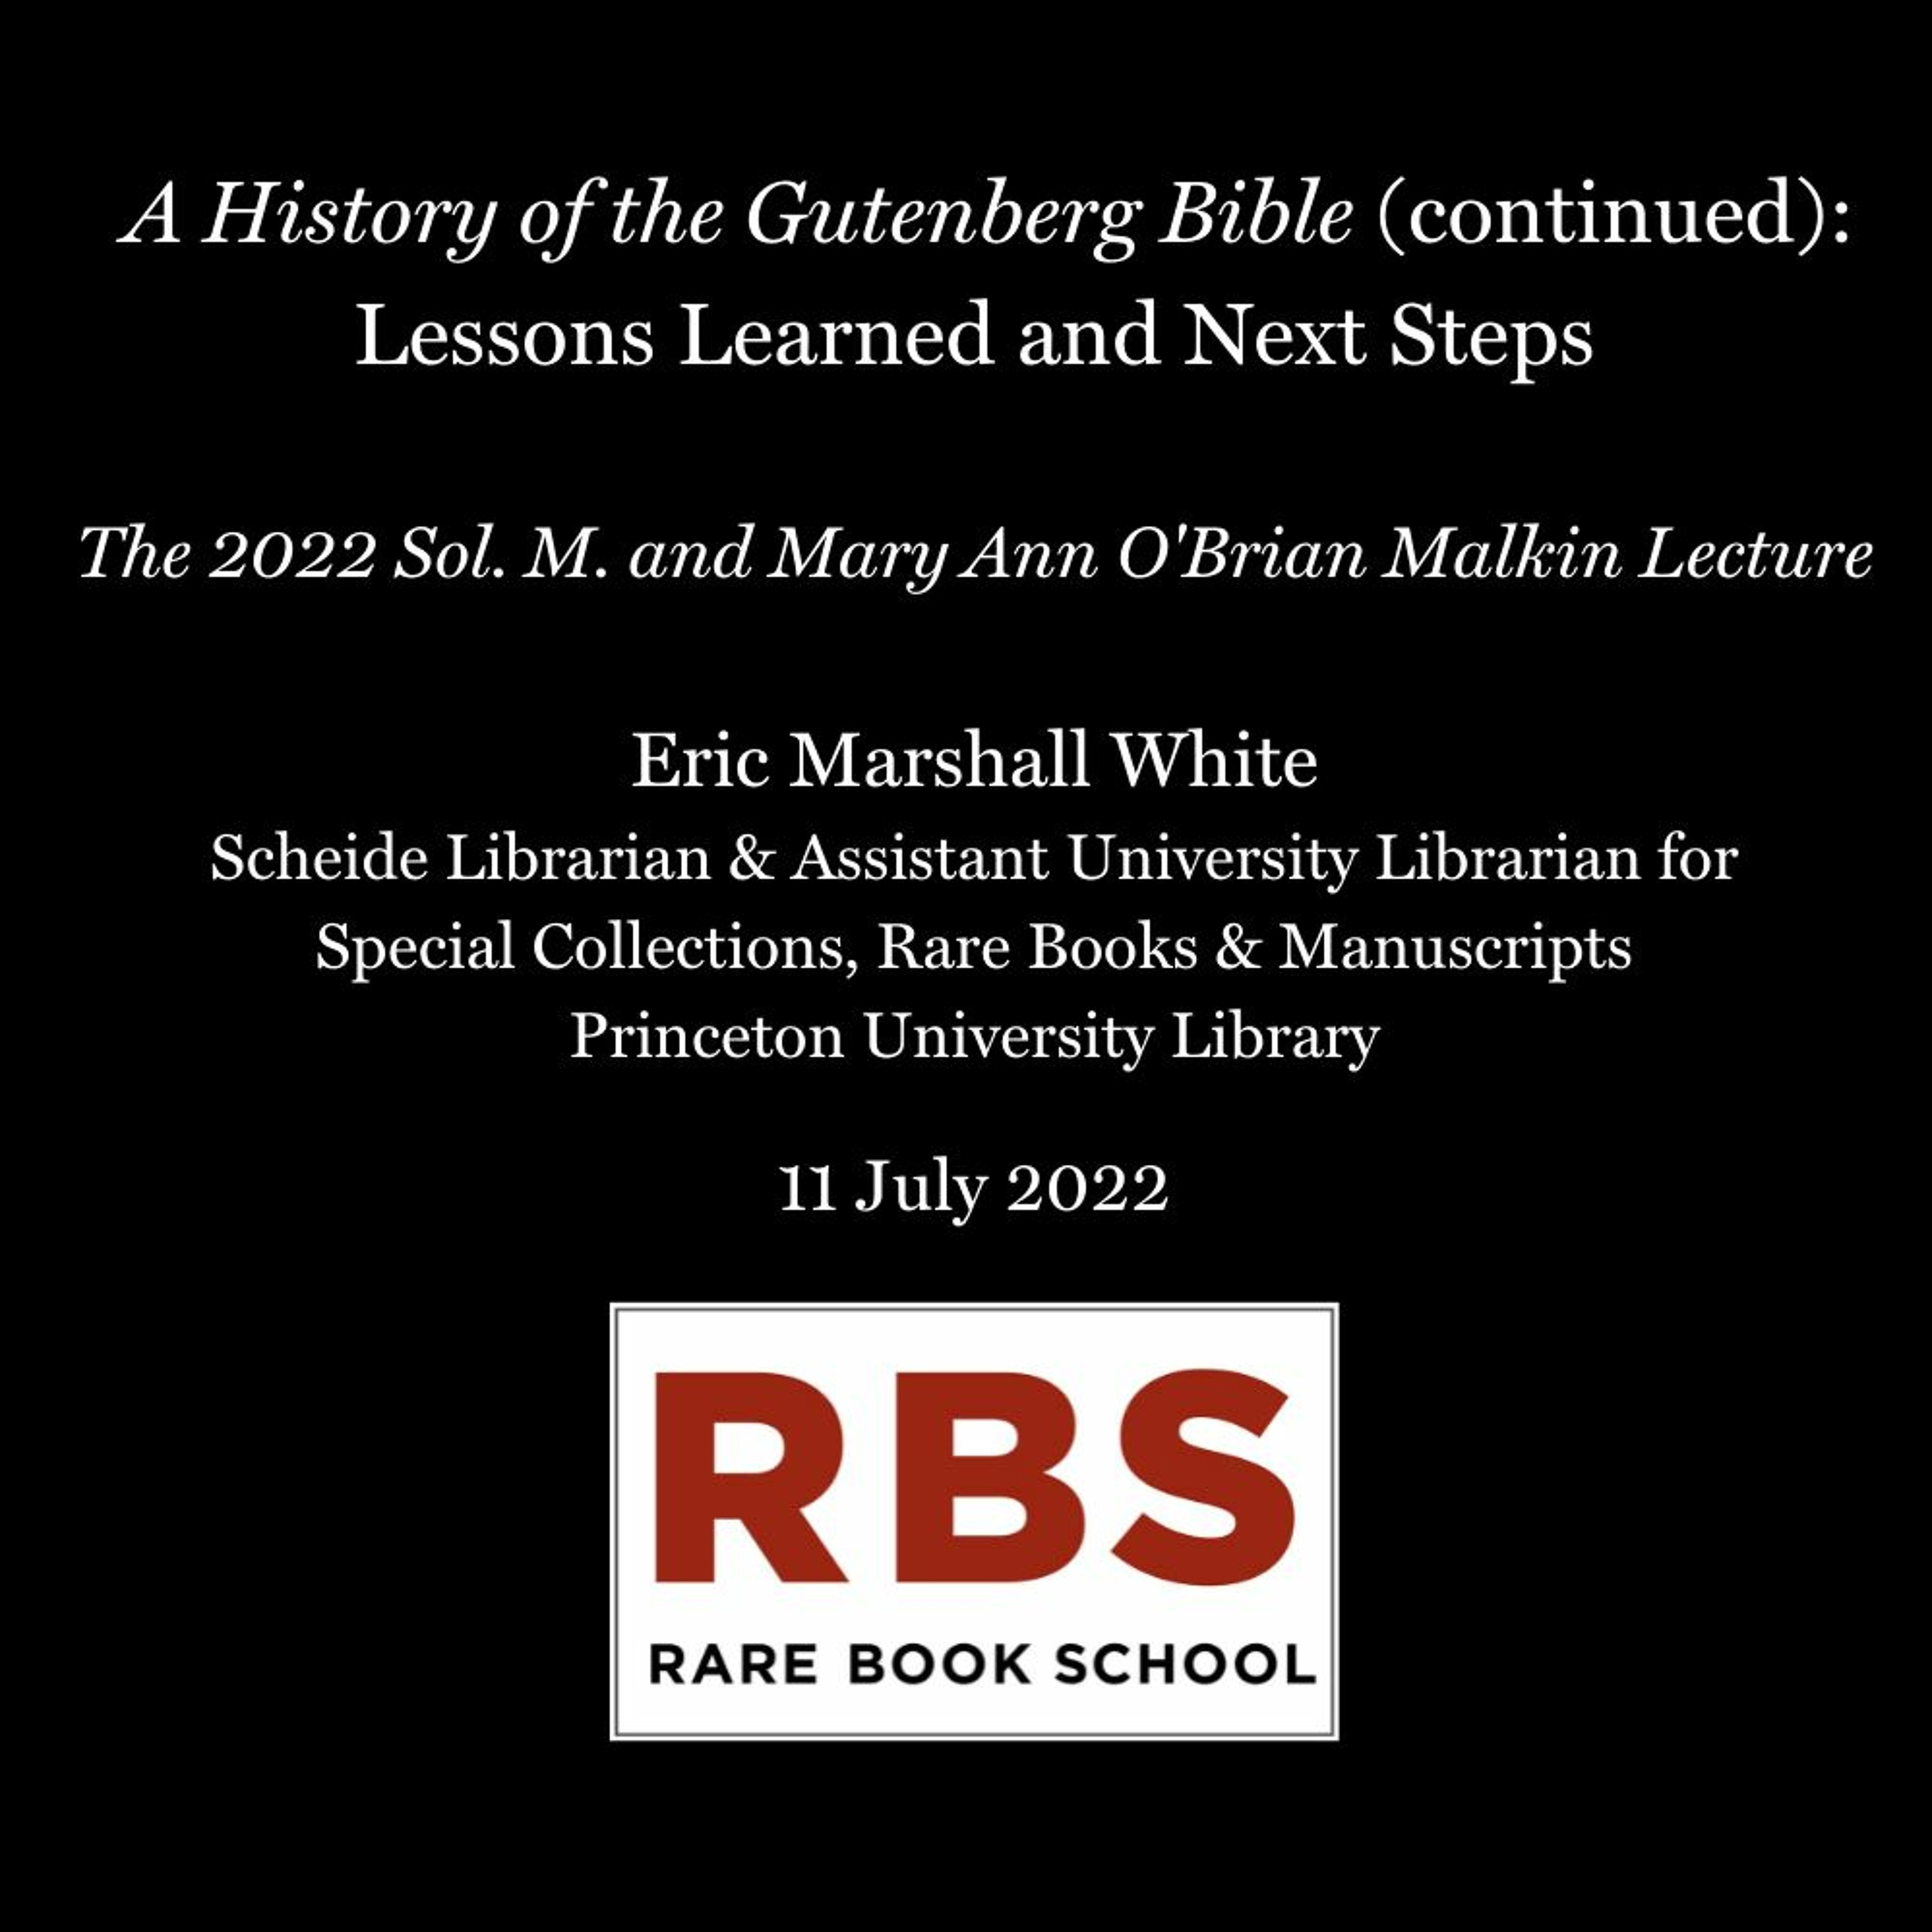 White, Eric - ”A History of the Gutenberg Bible (continued)” - Malkin Lecture, 11 July 2022